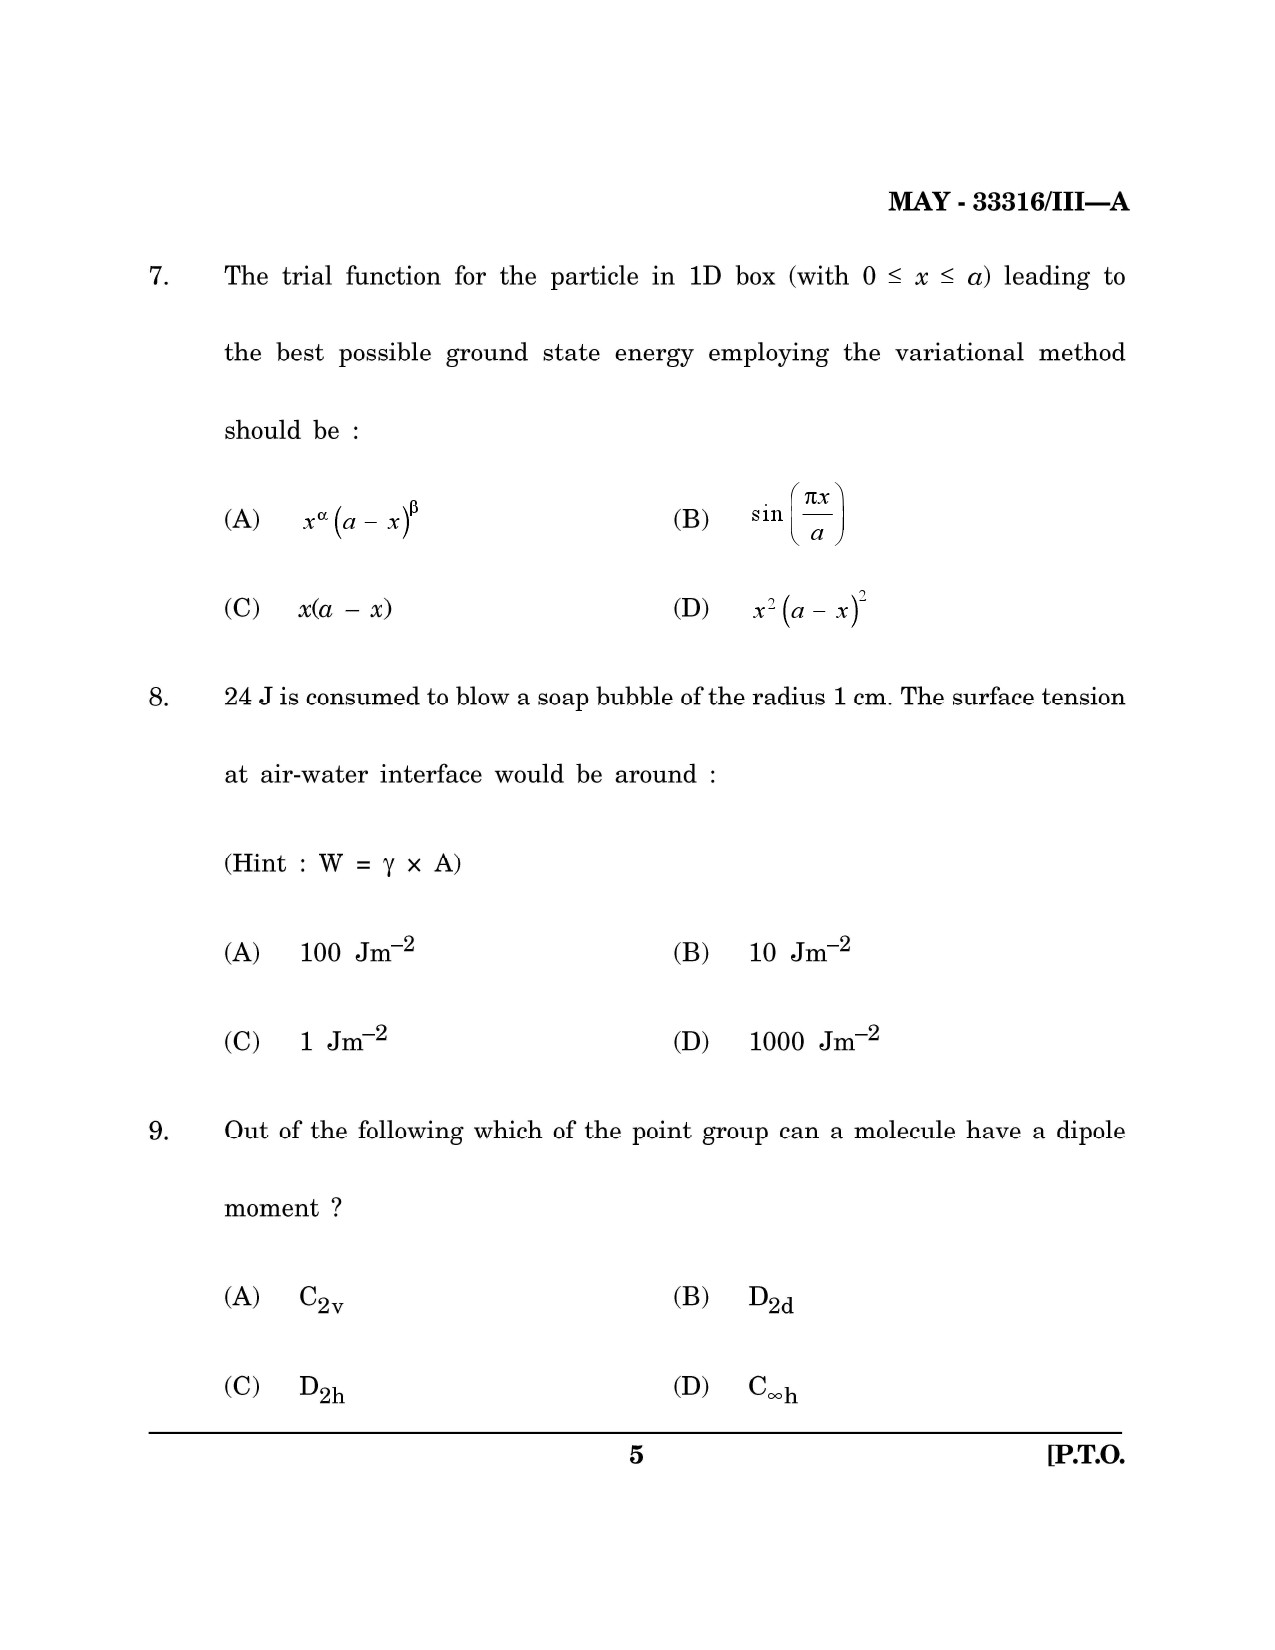 Maharashtra SET Chemical Sciences Question Paper III May 2016 4